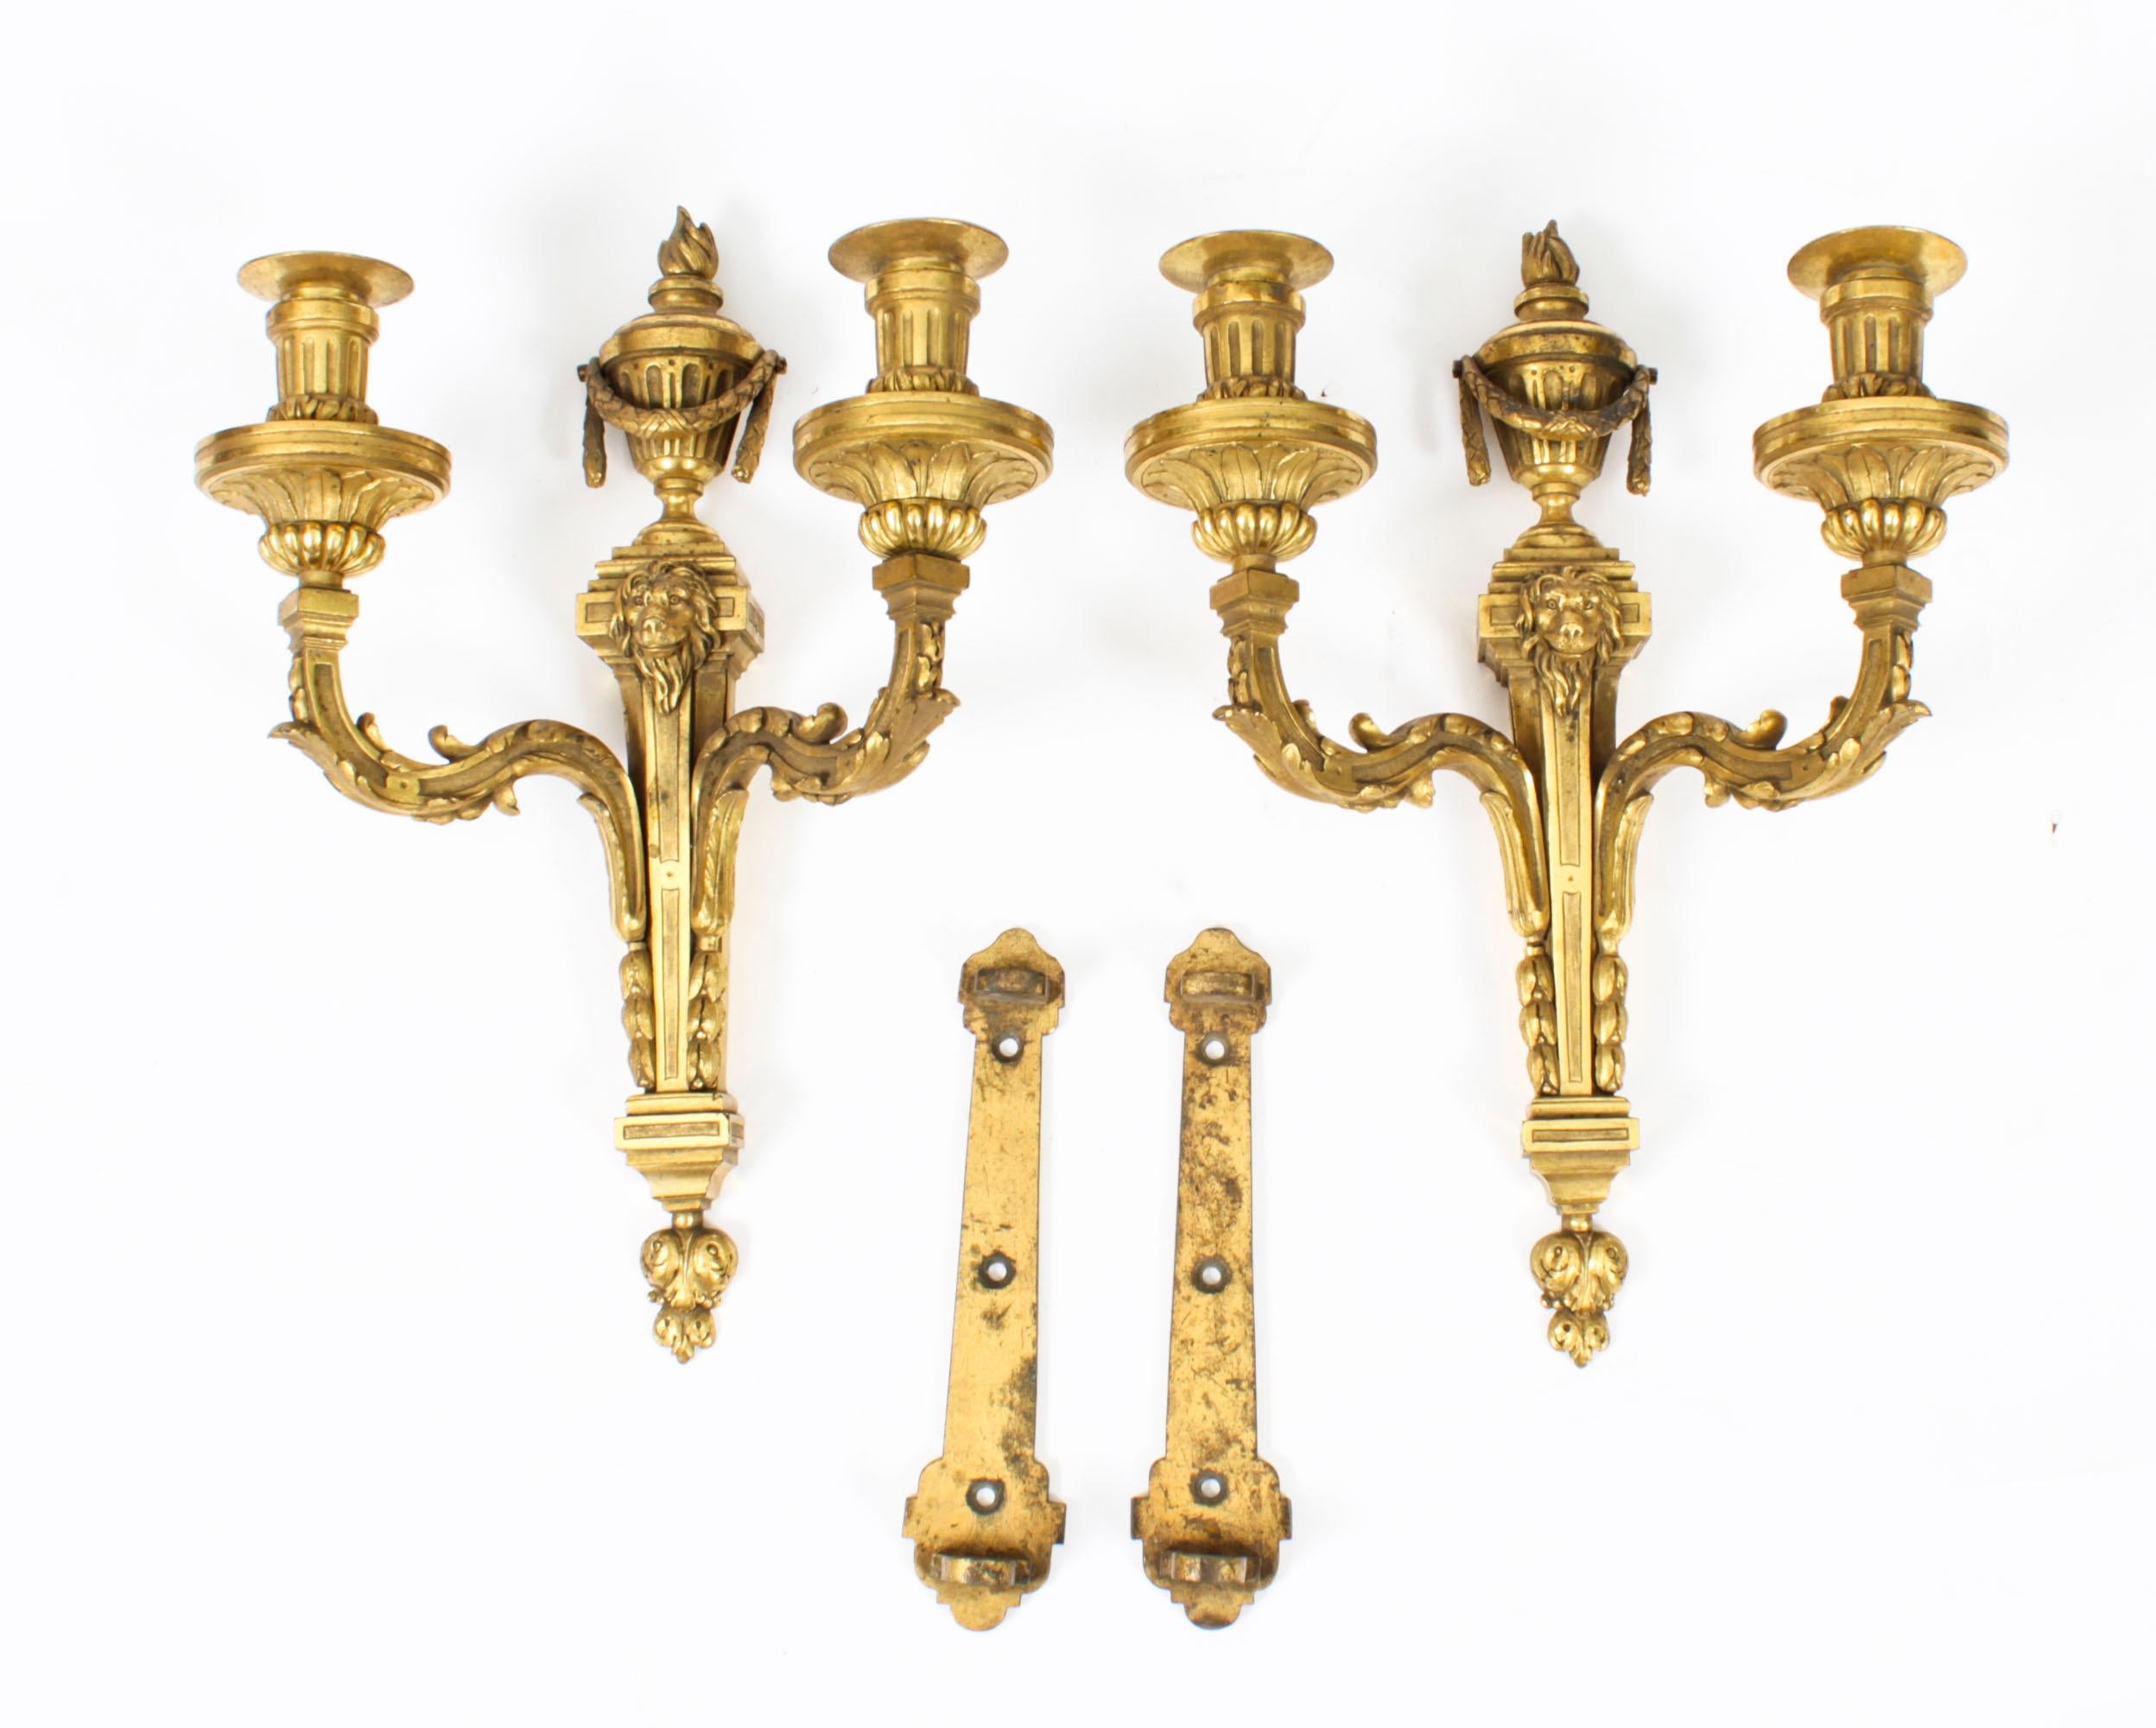 Antique Pair Regency Revival Ormolu Wall Lights Appliques Mid 19th Century For Sale 7